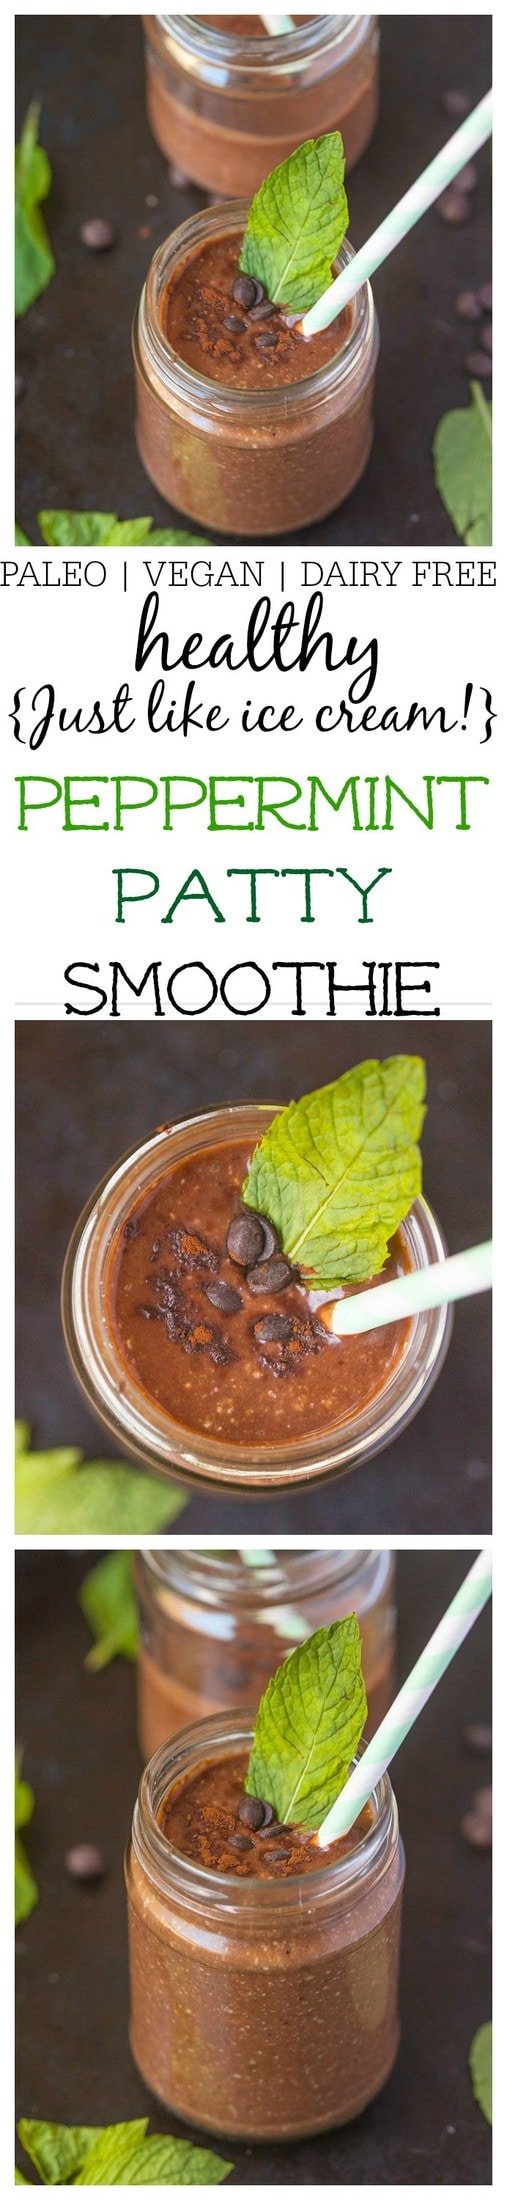 Healthy Peppermint Patty Smoothie- A quick and easy smoothie recipe which tastes like a peppermint patty but filled with superfood! Naturally vegan, dairy free, gluten free, sugar free and paleo- Creamy, thick and just like ice cream! @thebigmansworld- thebigmansworld.com